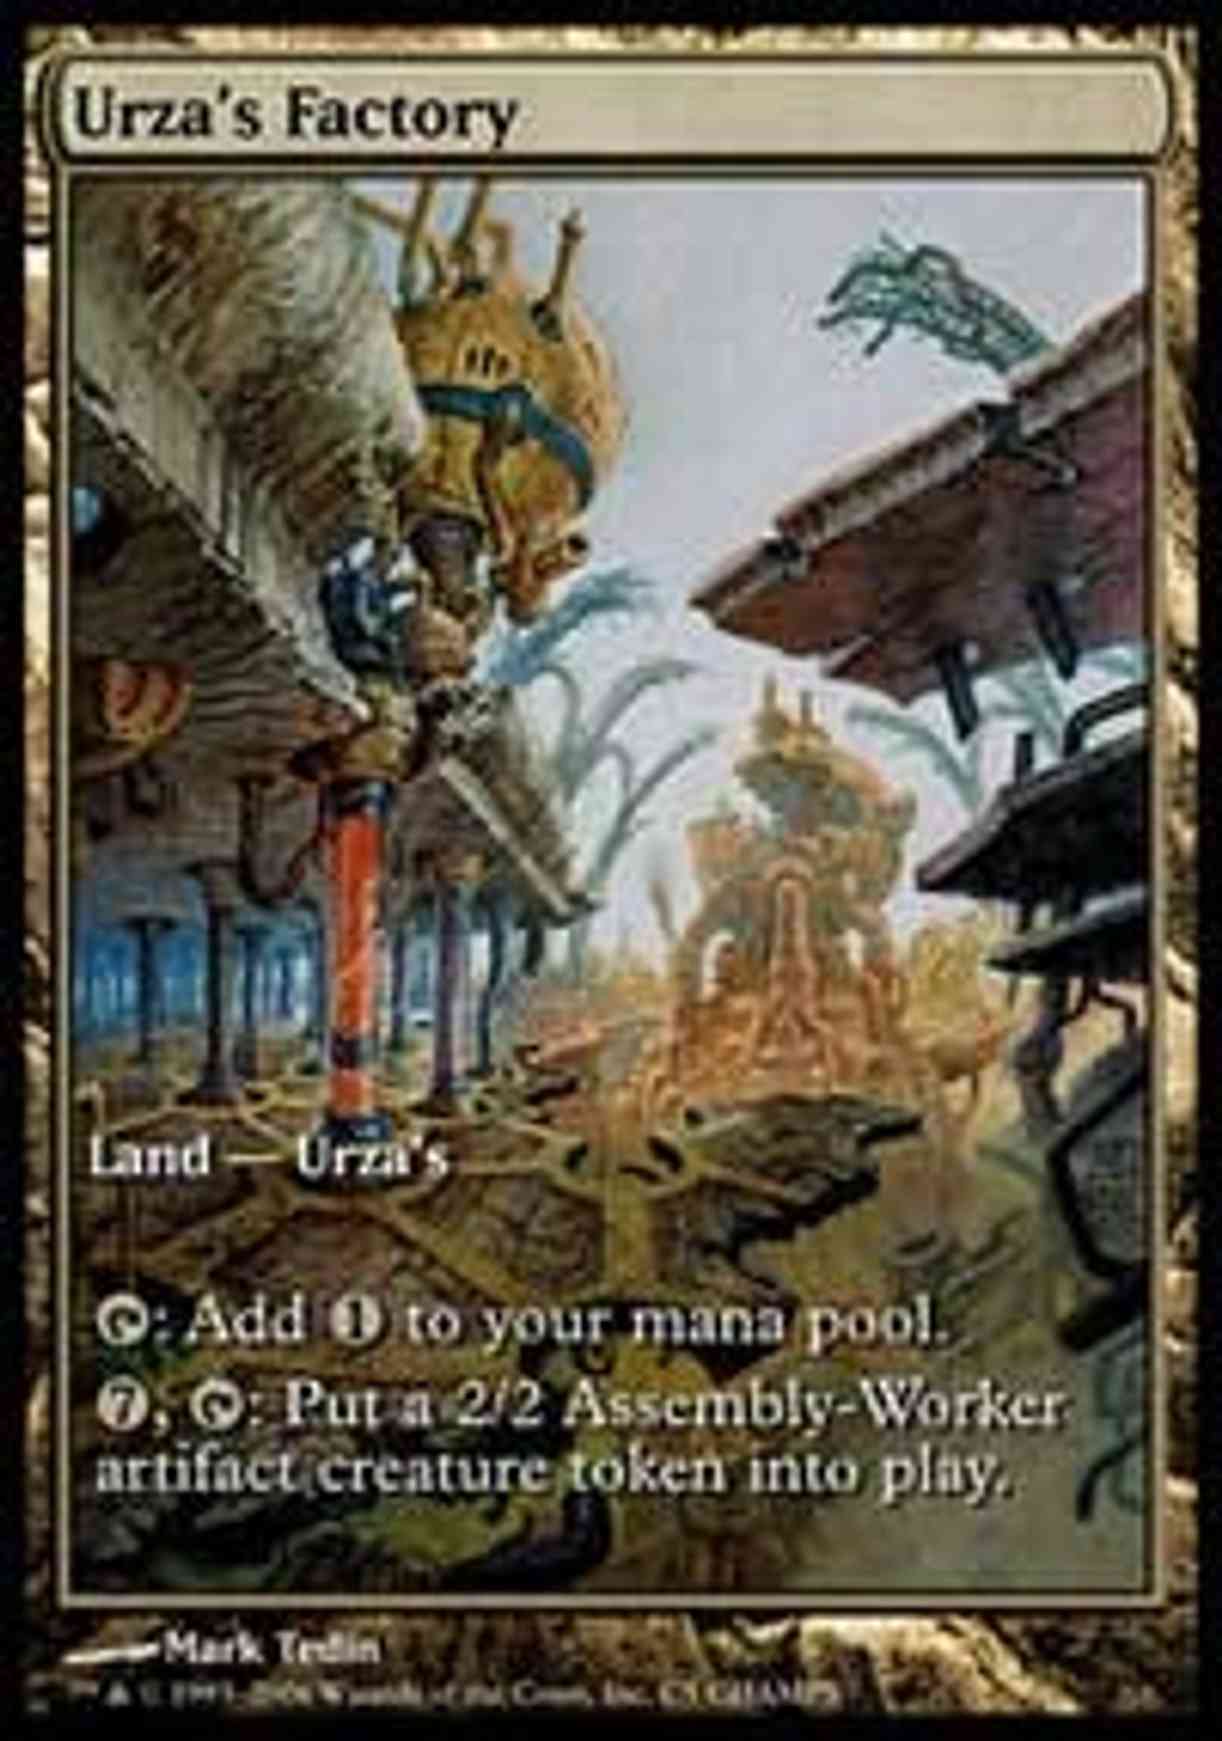 Urza's Factory magic card front